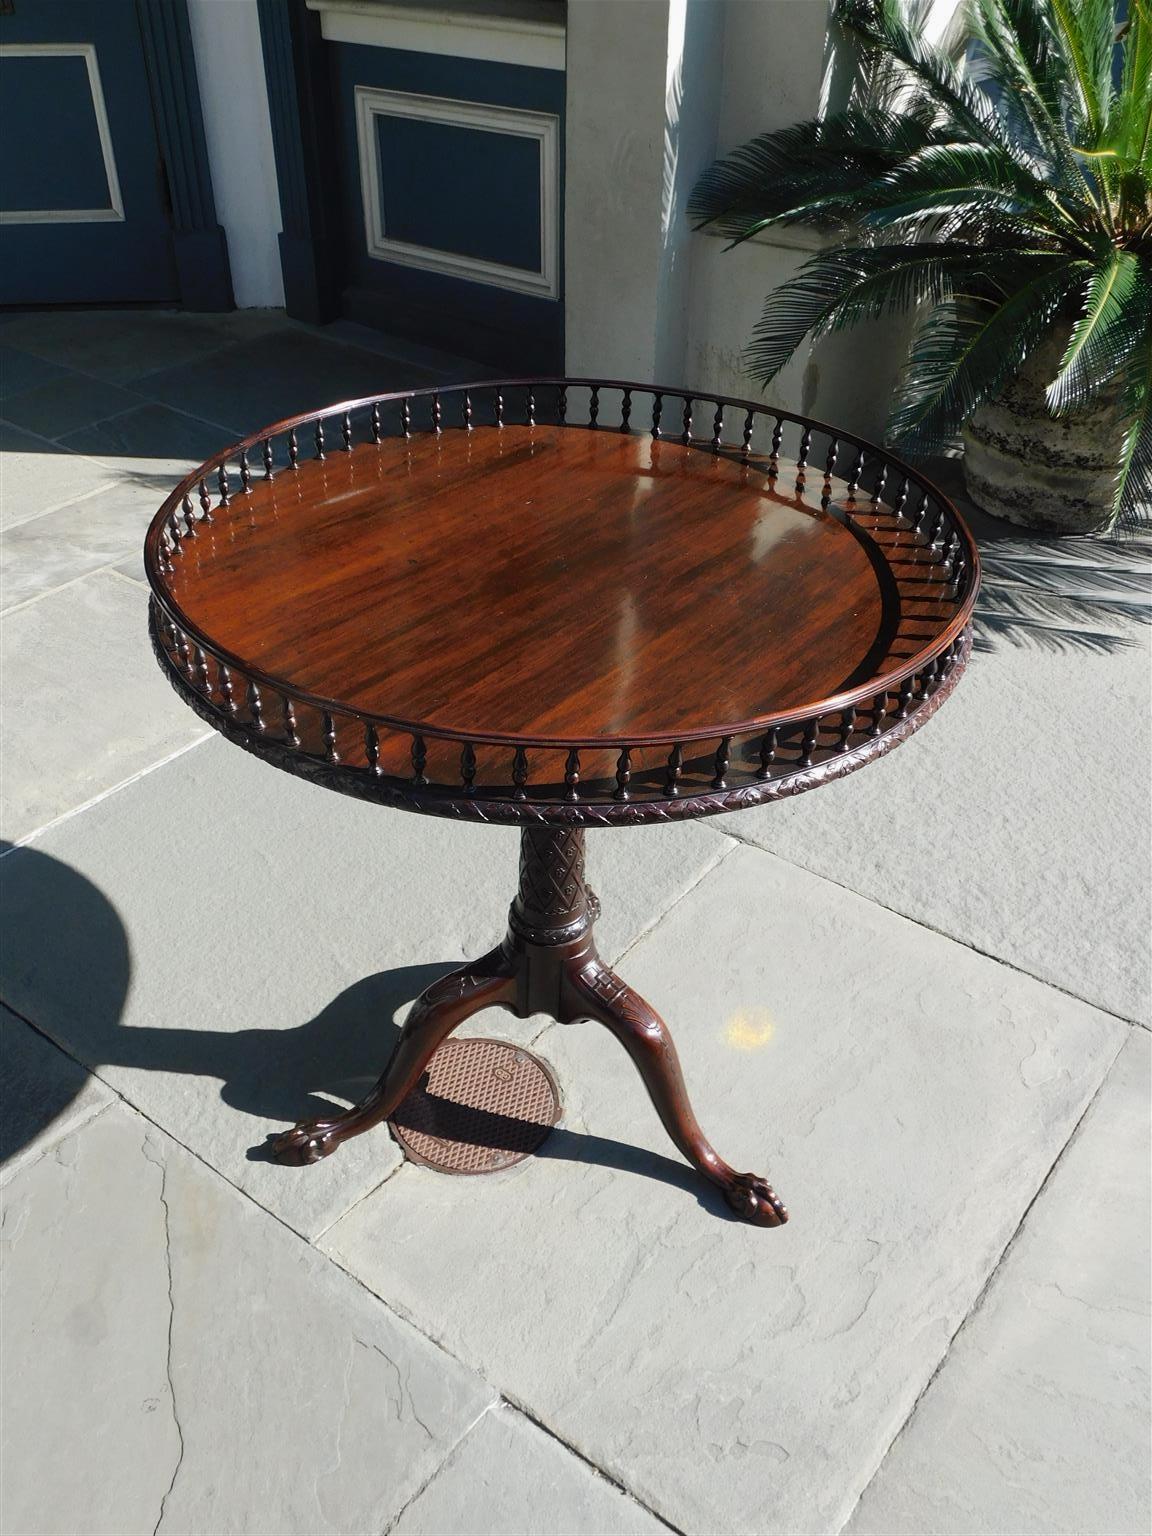 Scottish Chippendale Cuban mahogany tilt top tea table with a circular carved gallery, one board top, carved molded edge, supporting bird cage and resting on a turned tapered floral ribbon carved pedestal. Splayed curvature legs have a carved shell